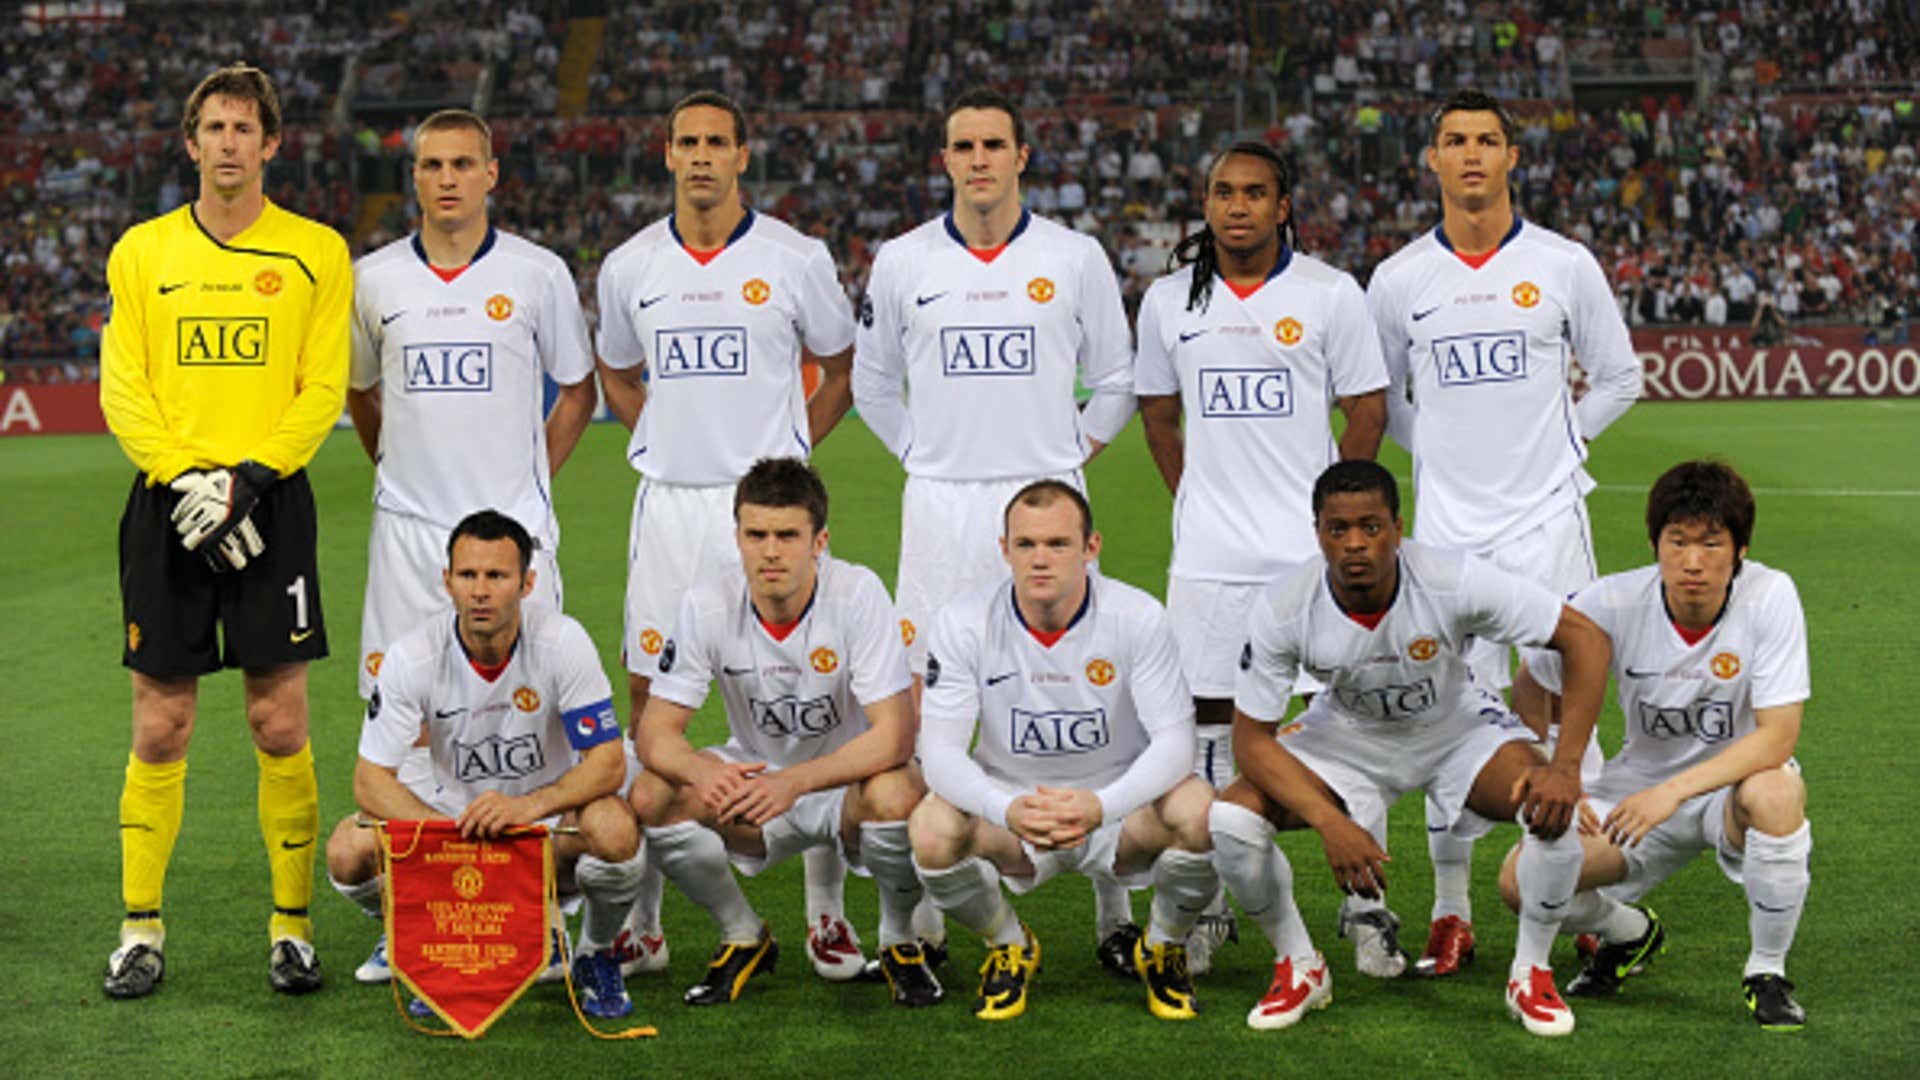 Manchester United, Champions League 2009